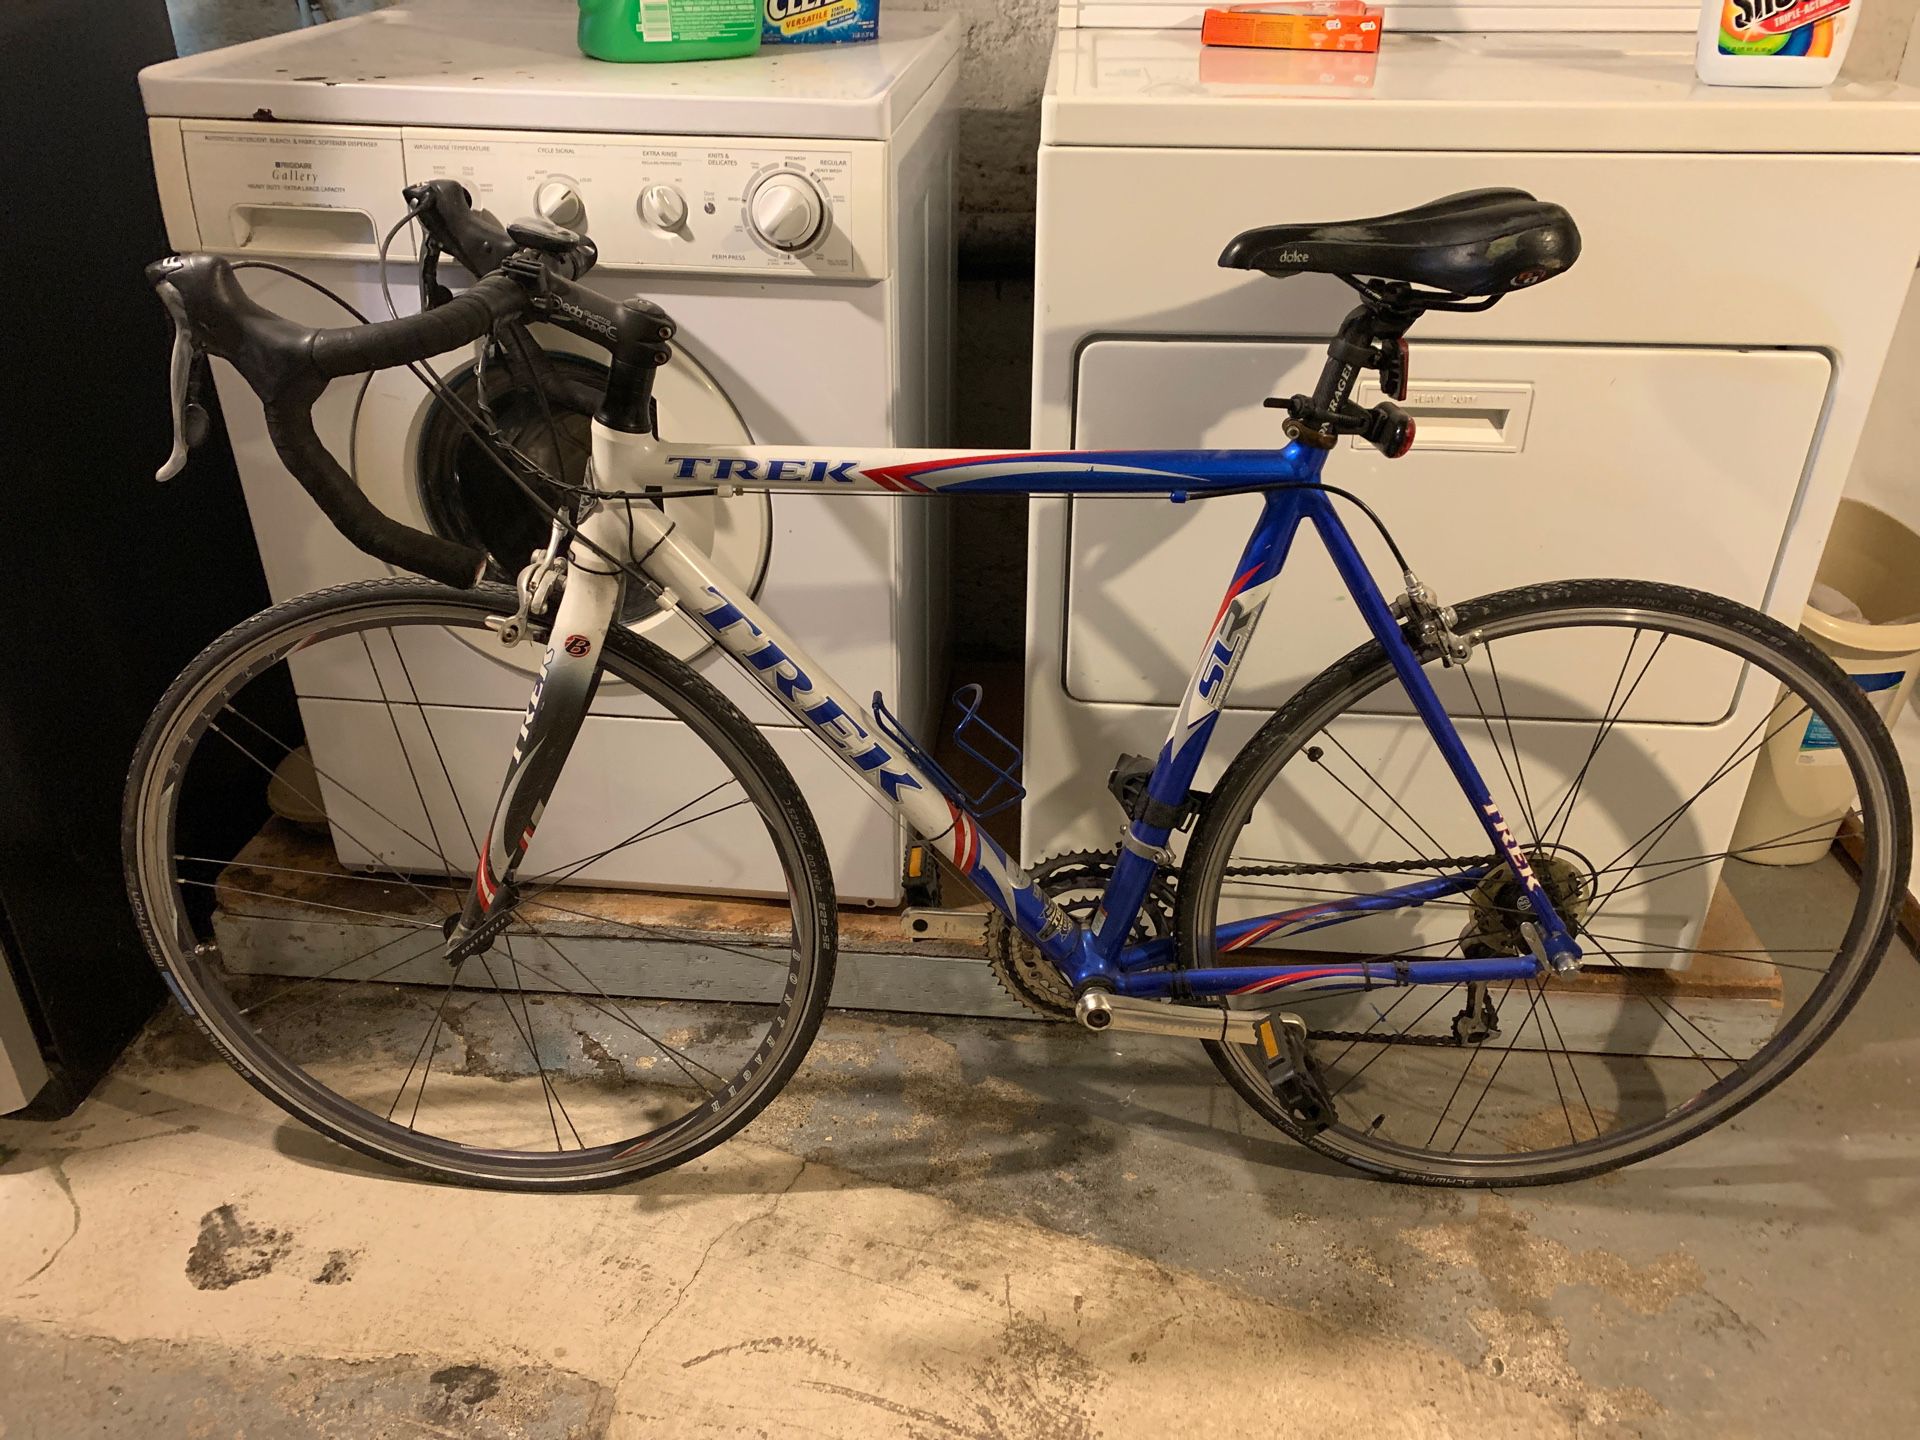 Trek road bike. About 10 years old. Would make an awesome commuter bike. Selling as is